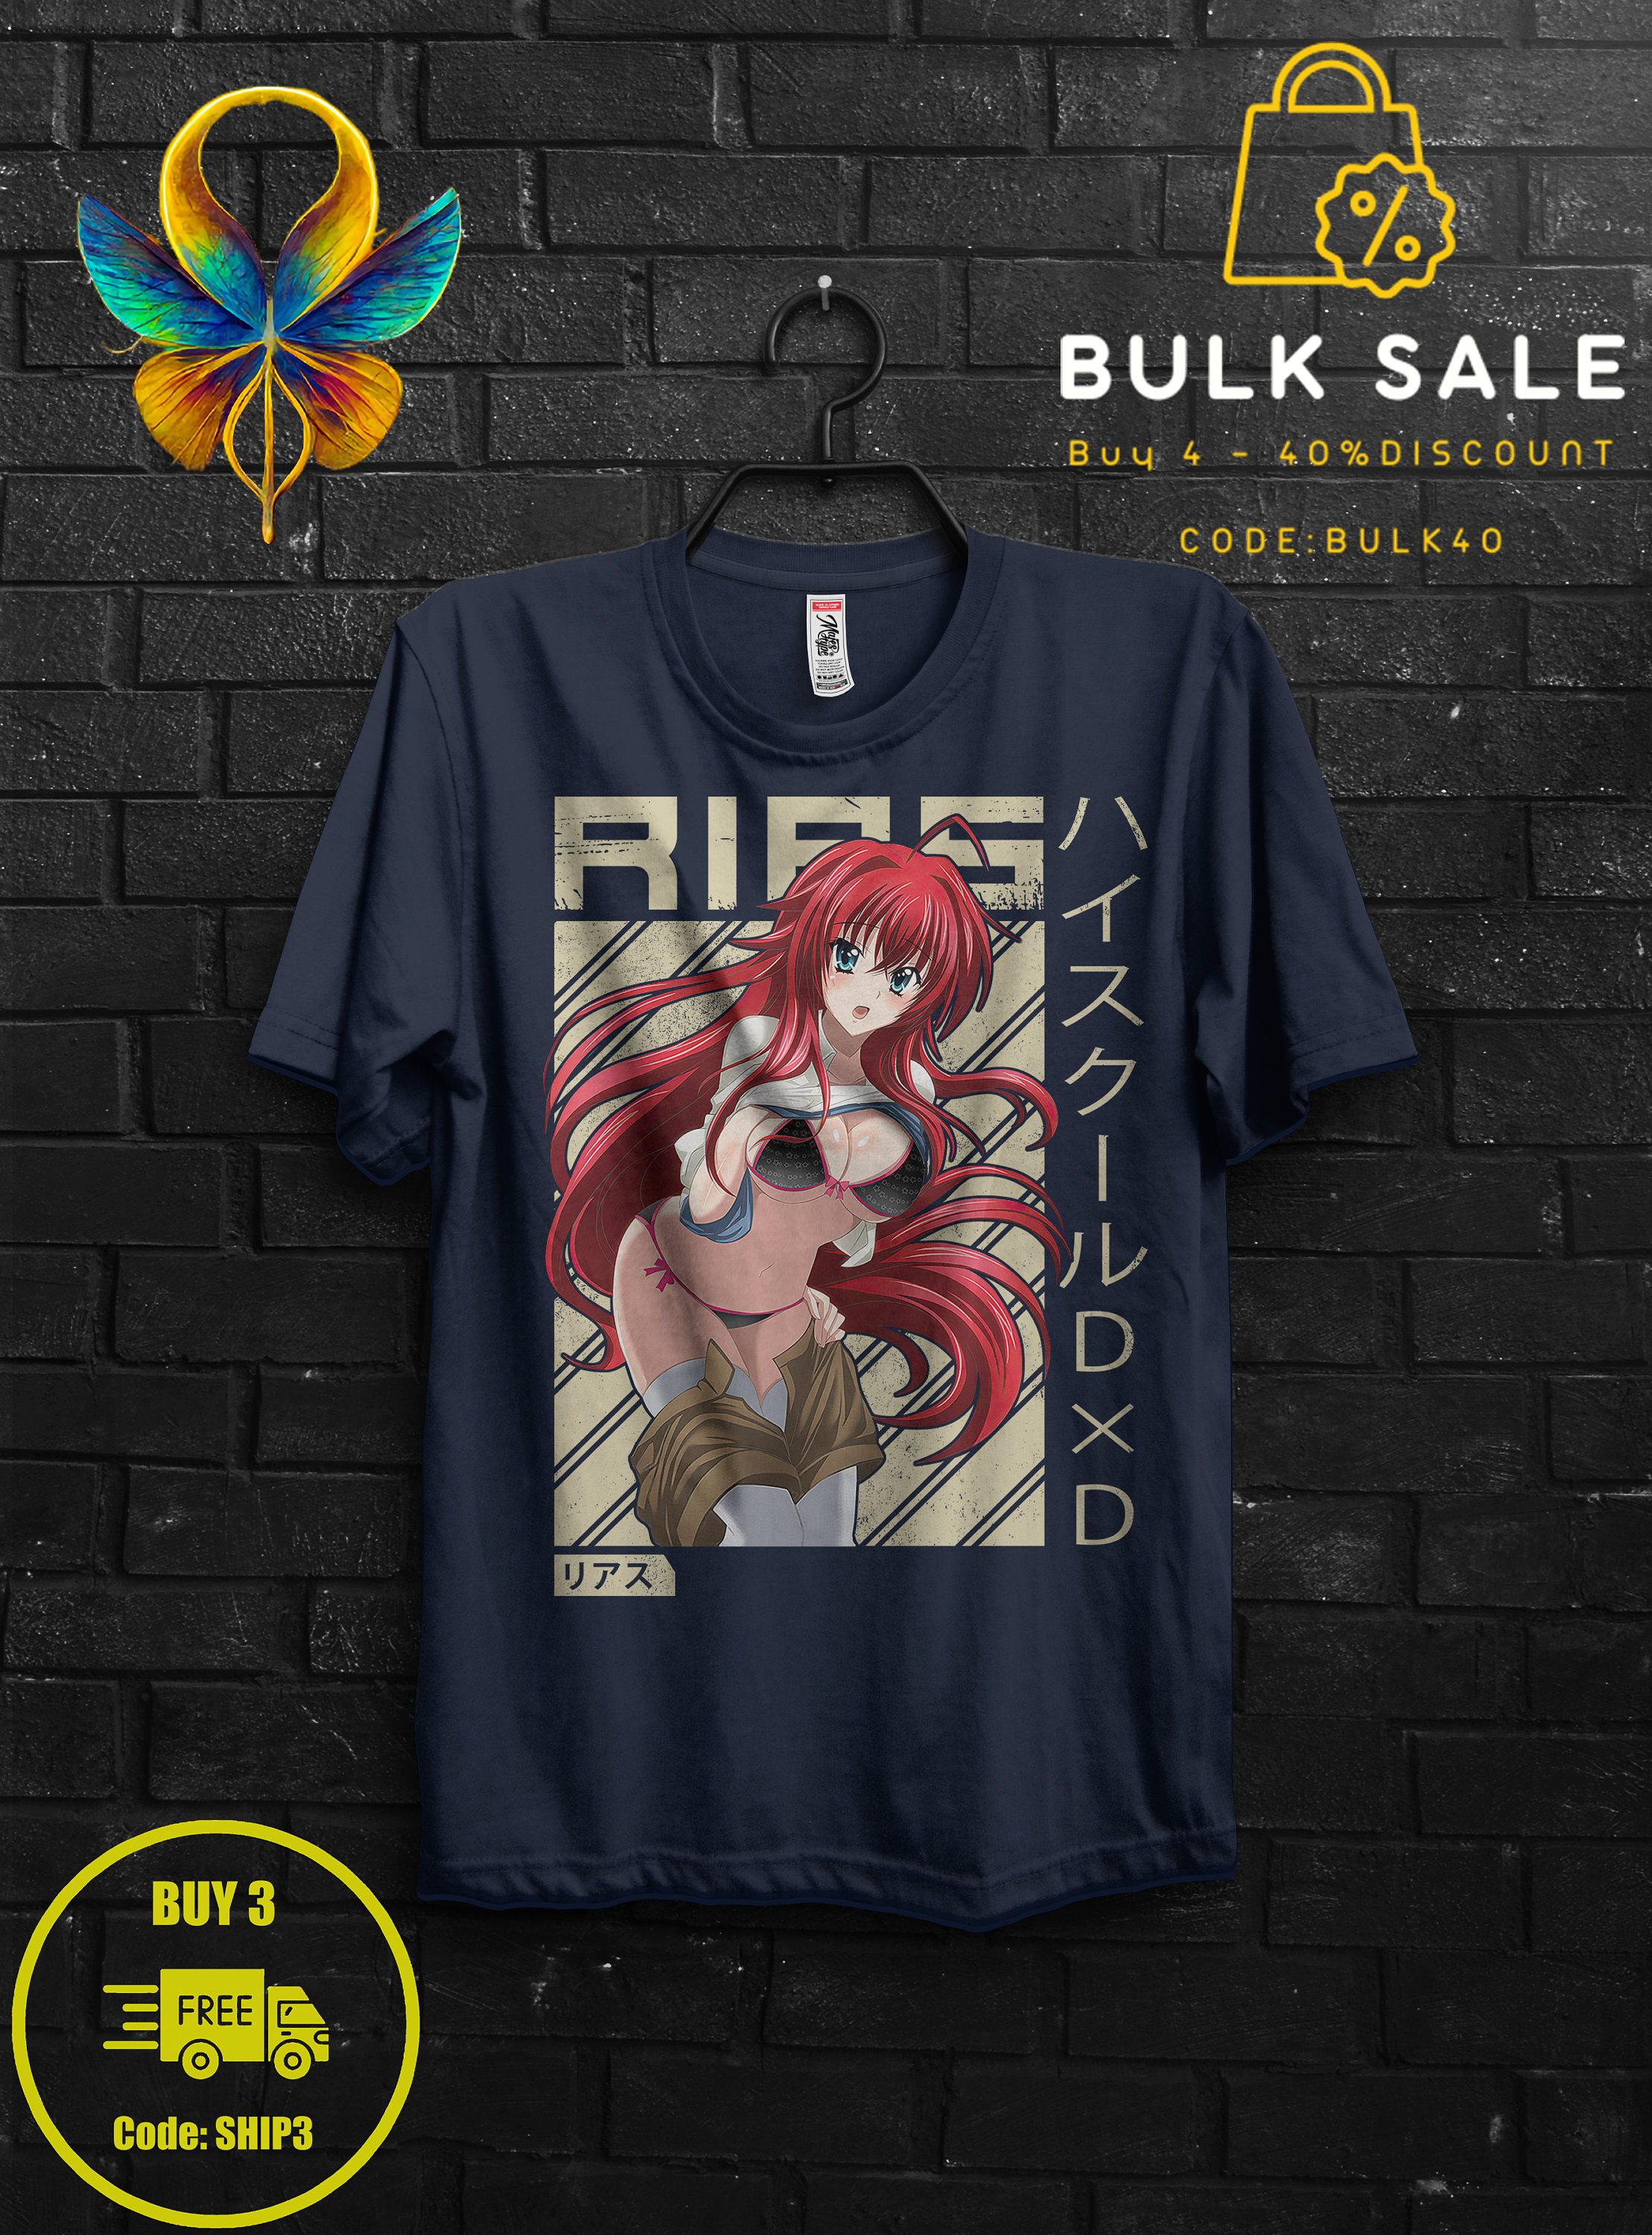 Rias Gremory Shirt Anime Gift Cosplay For Girl,Issei Hyoudou Sweat,High School DxD Tee,Xenovia Appareal For Her,Rossweisse Tshirt For Sitri 1600232879